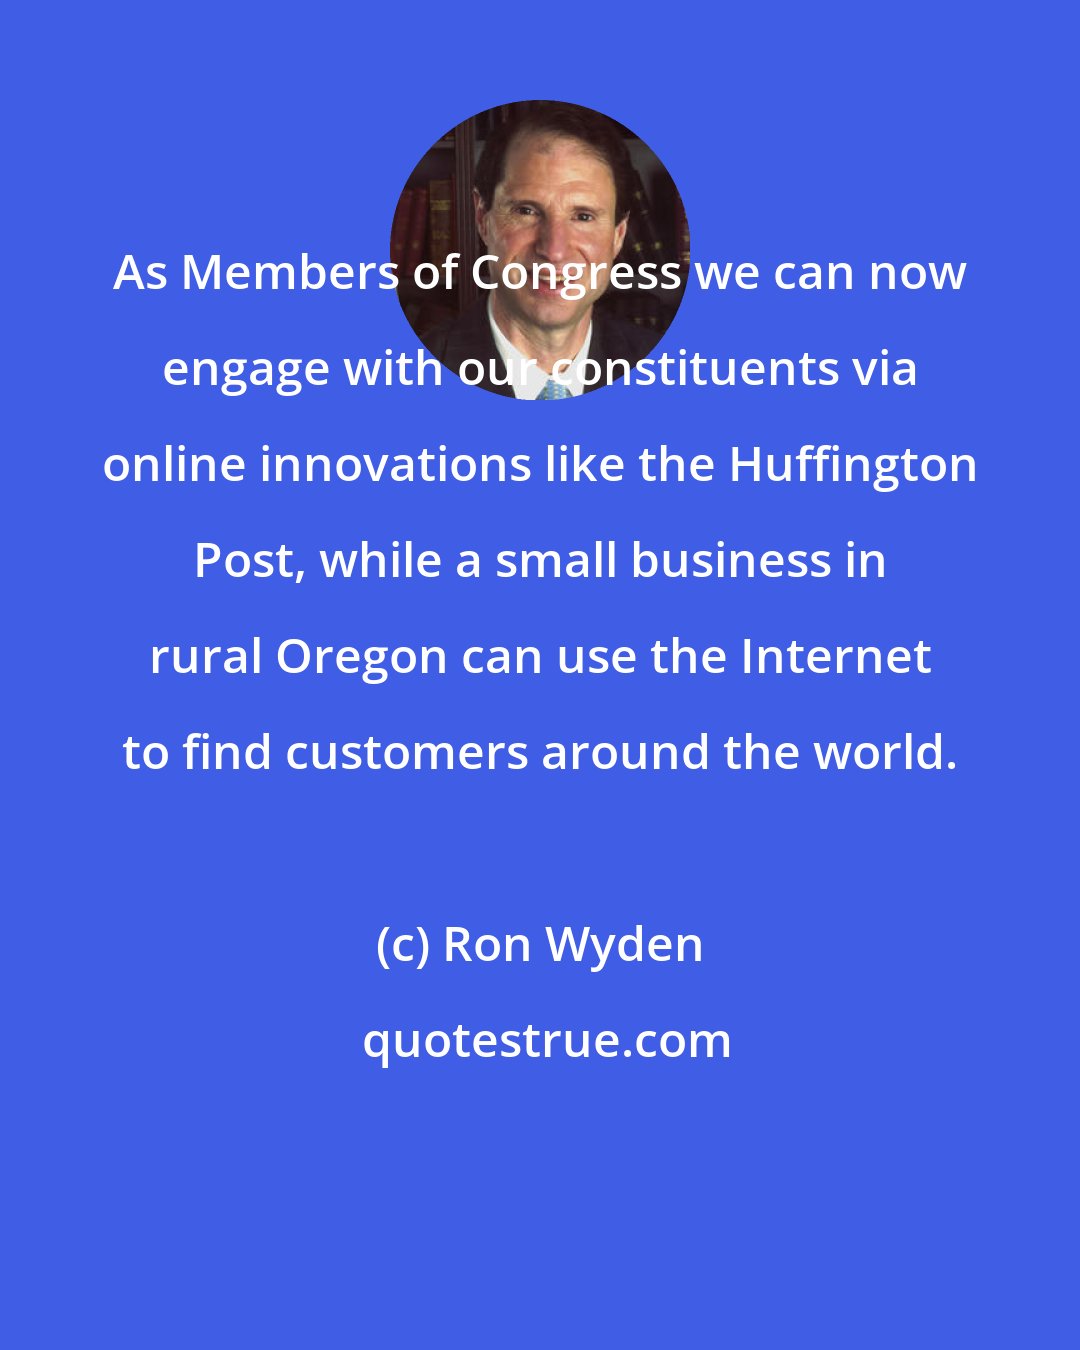 Ron Wyden: As Members of Congress we can now engage with our constituents via online innovations like the Huffington Post, while a small business in rural Oregon can use the Internet to find customers around the world.